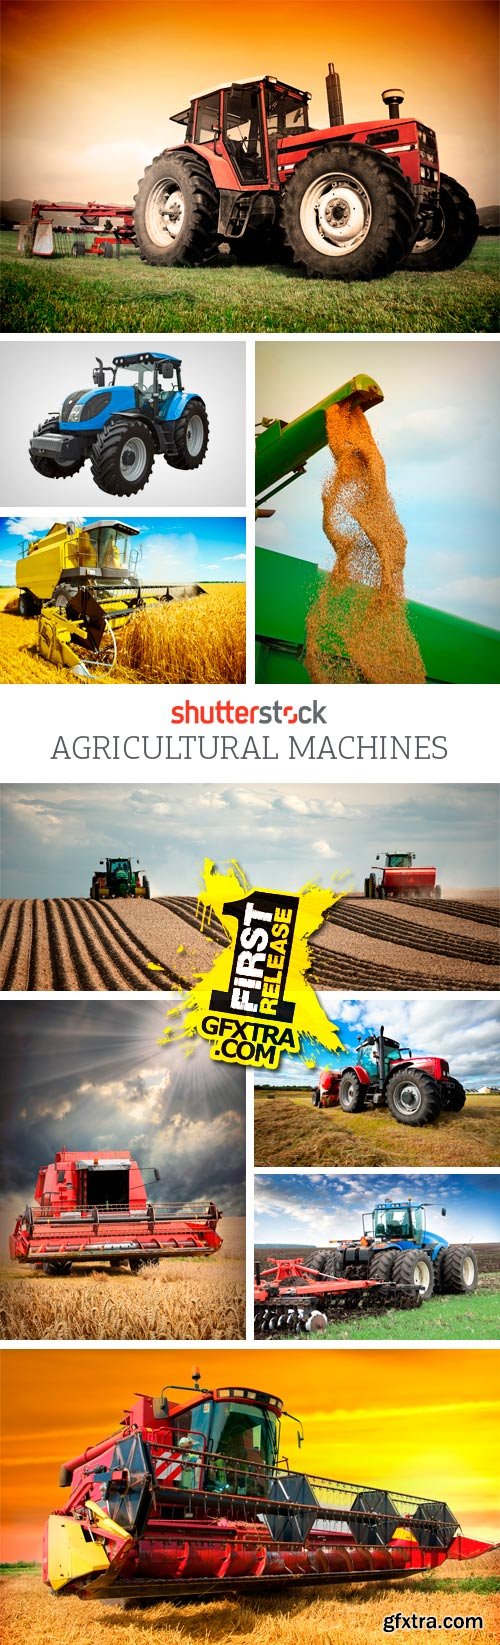 Amazing SS - Agricultural Machines, 25xJPGs